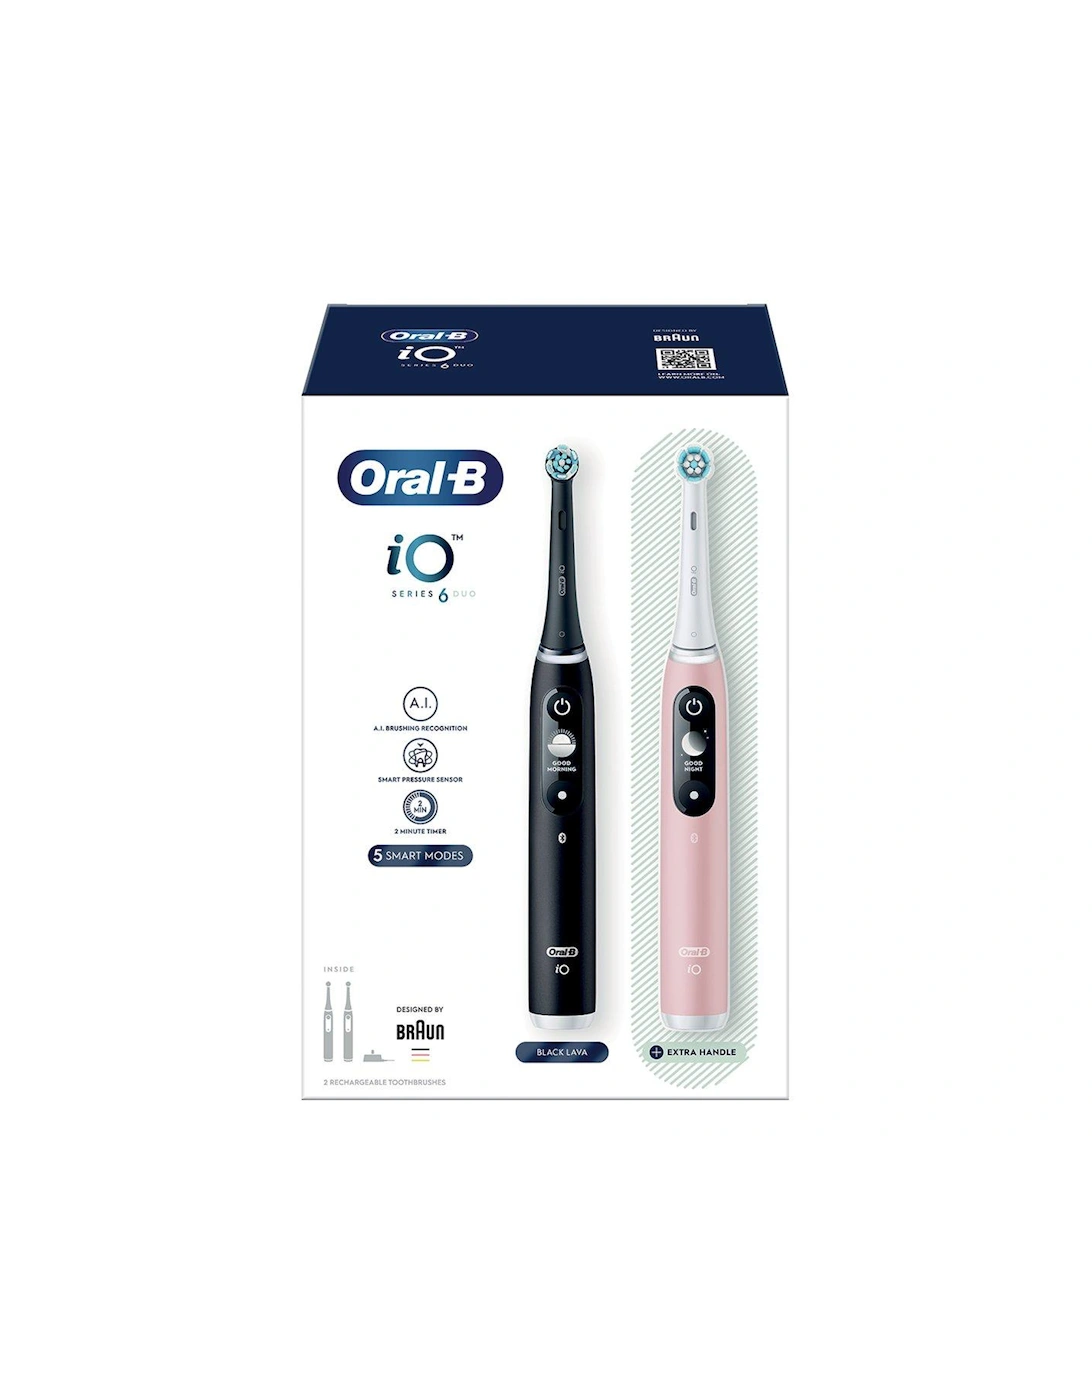 Oral-B iO6 Black Lava and Pink Sand Electric Toothbrush Duo Pack